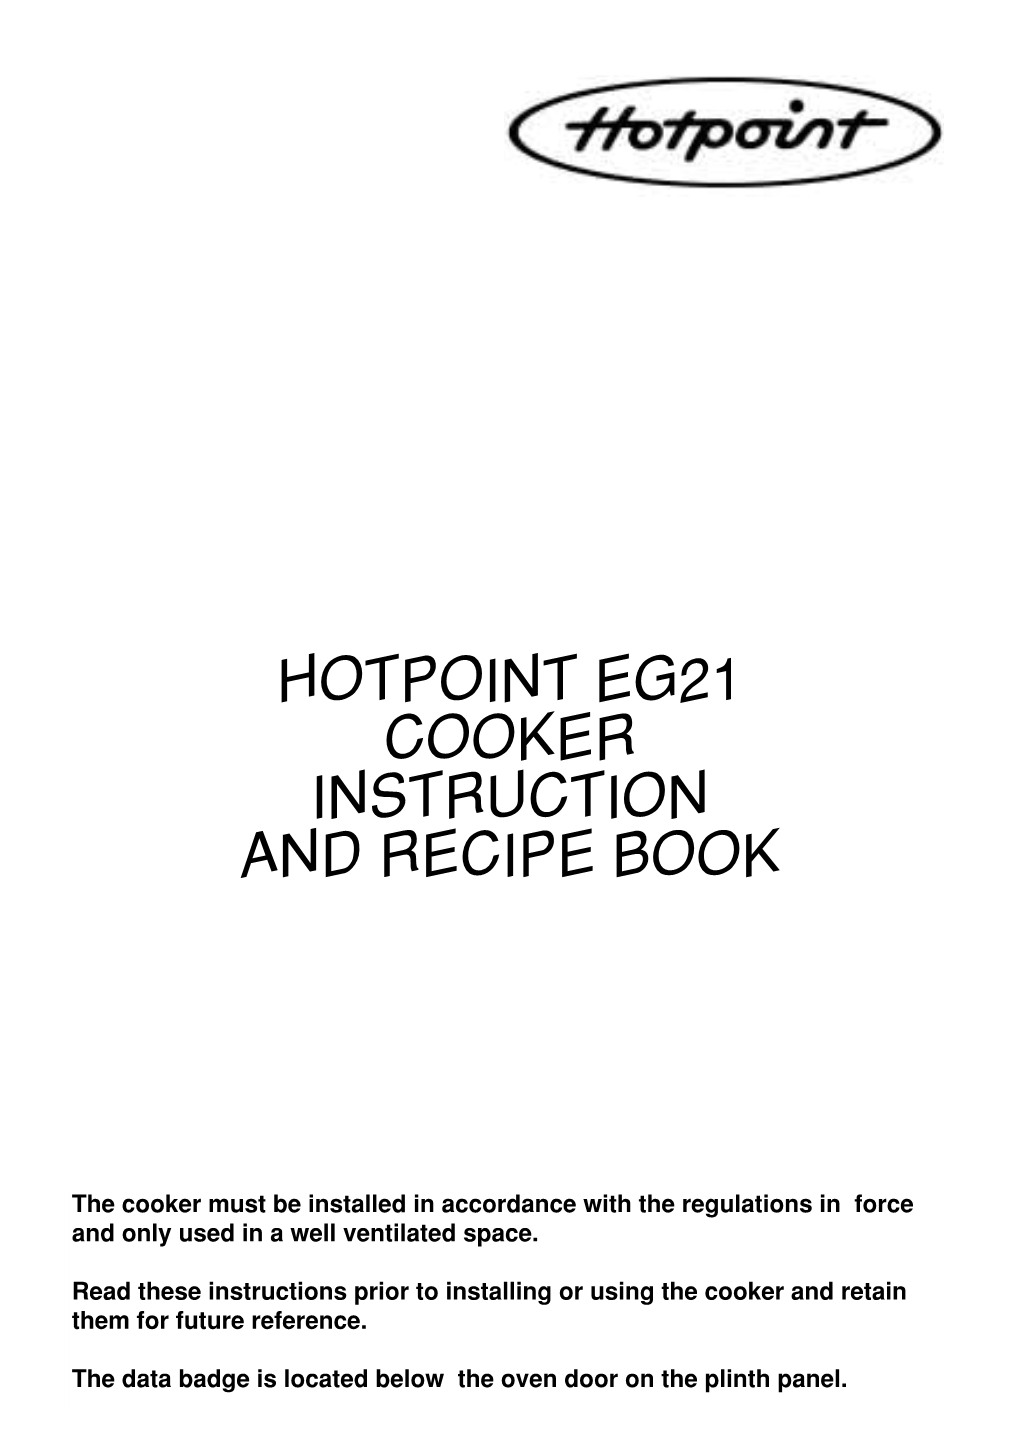 Hotpoint Eg21 Cooker Instruction and Recipe Book